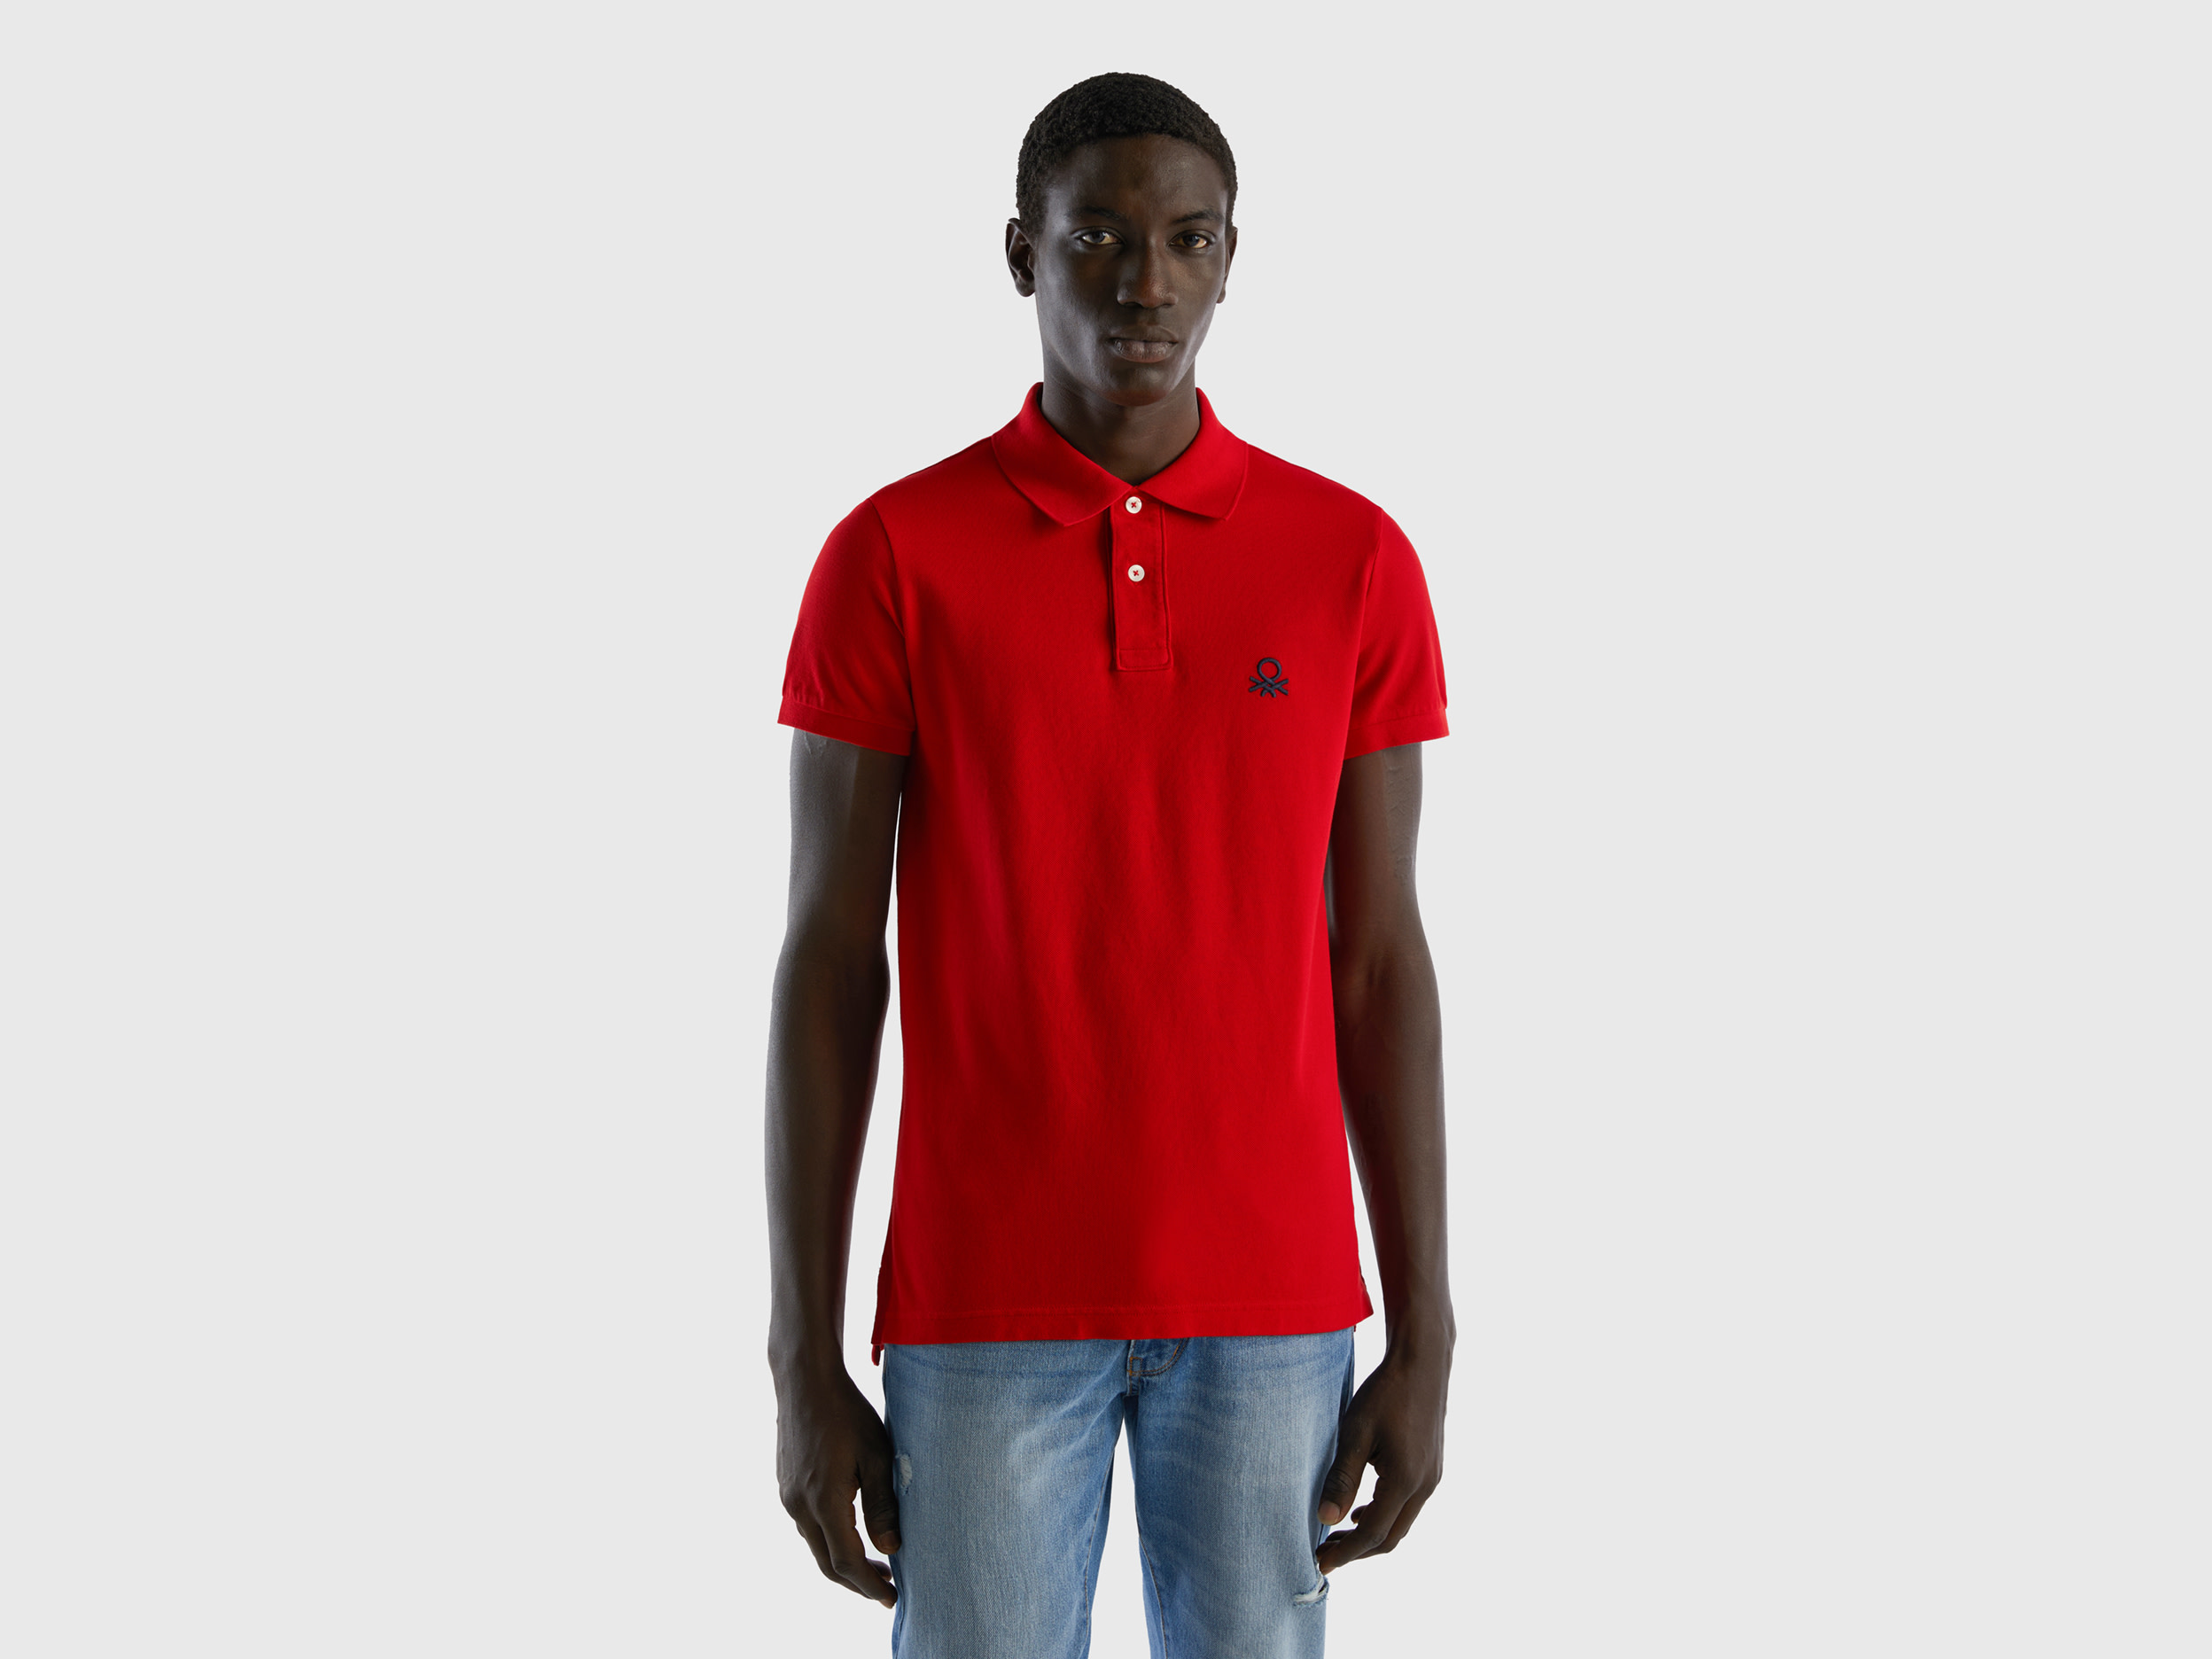 Image of Benetton, Red Slim Fit Polo, size XXL, Red, Men